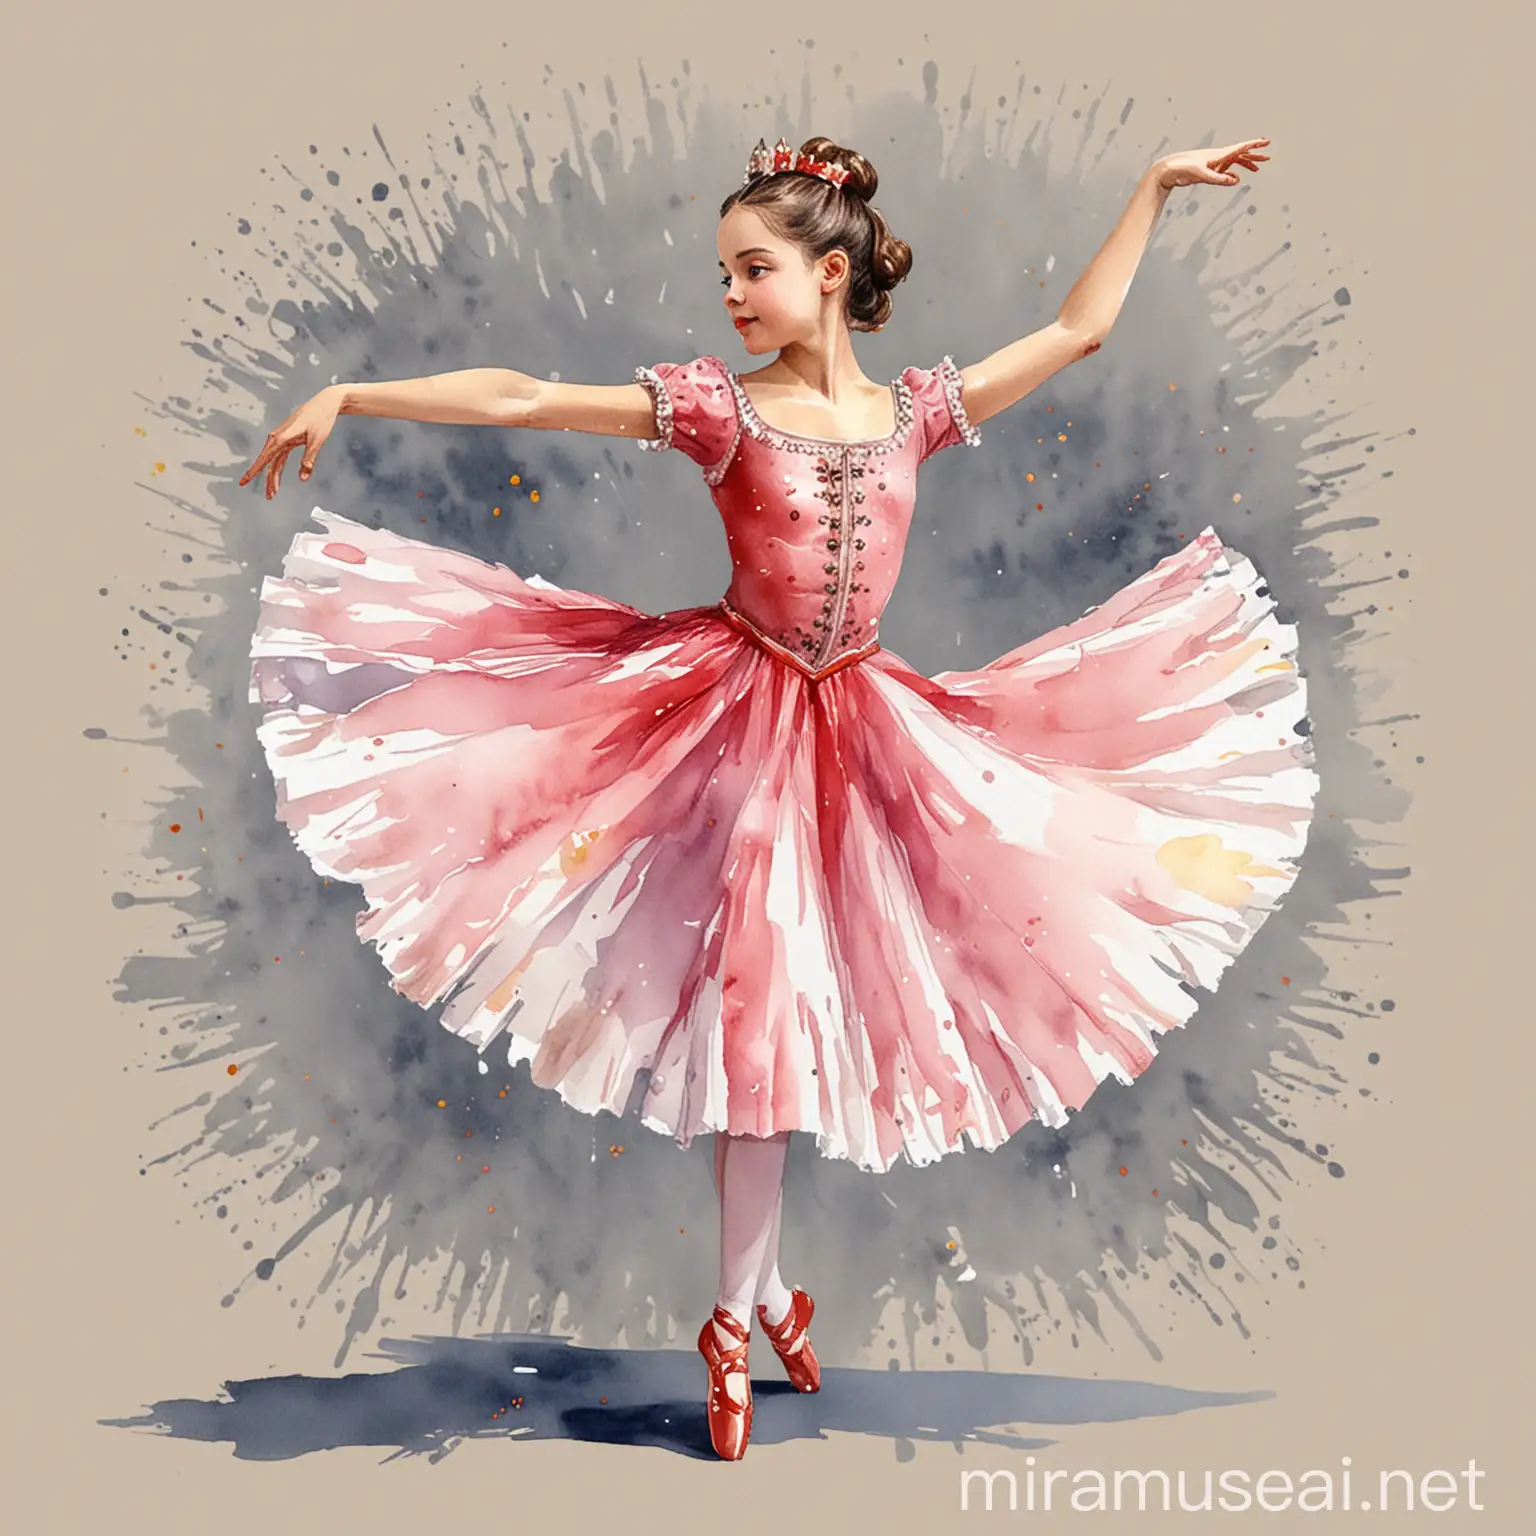 the Nutcracker dancer Girl drawing style for children watercolor
